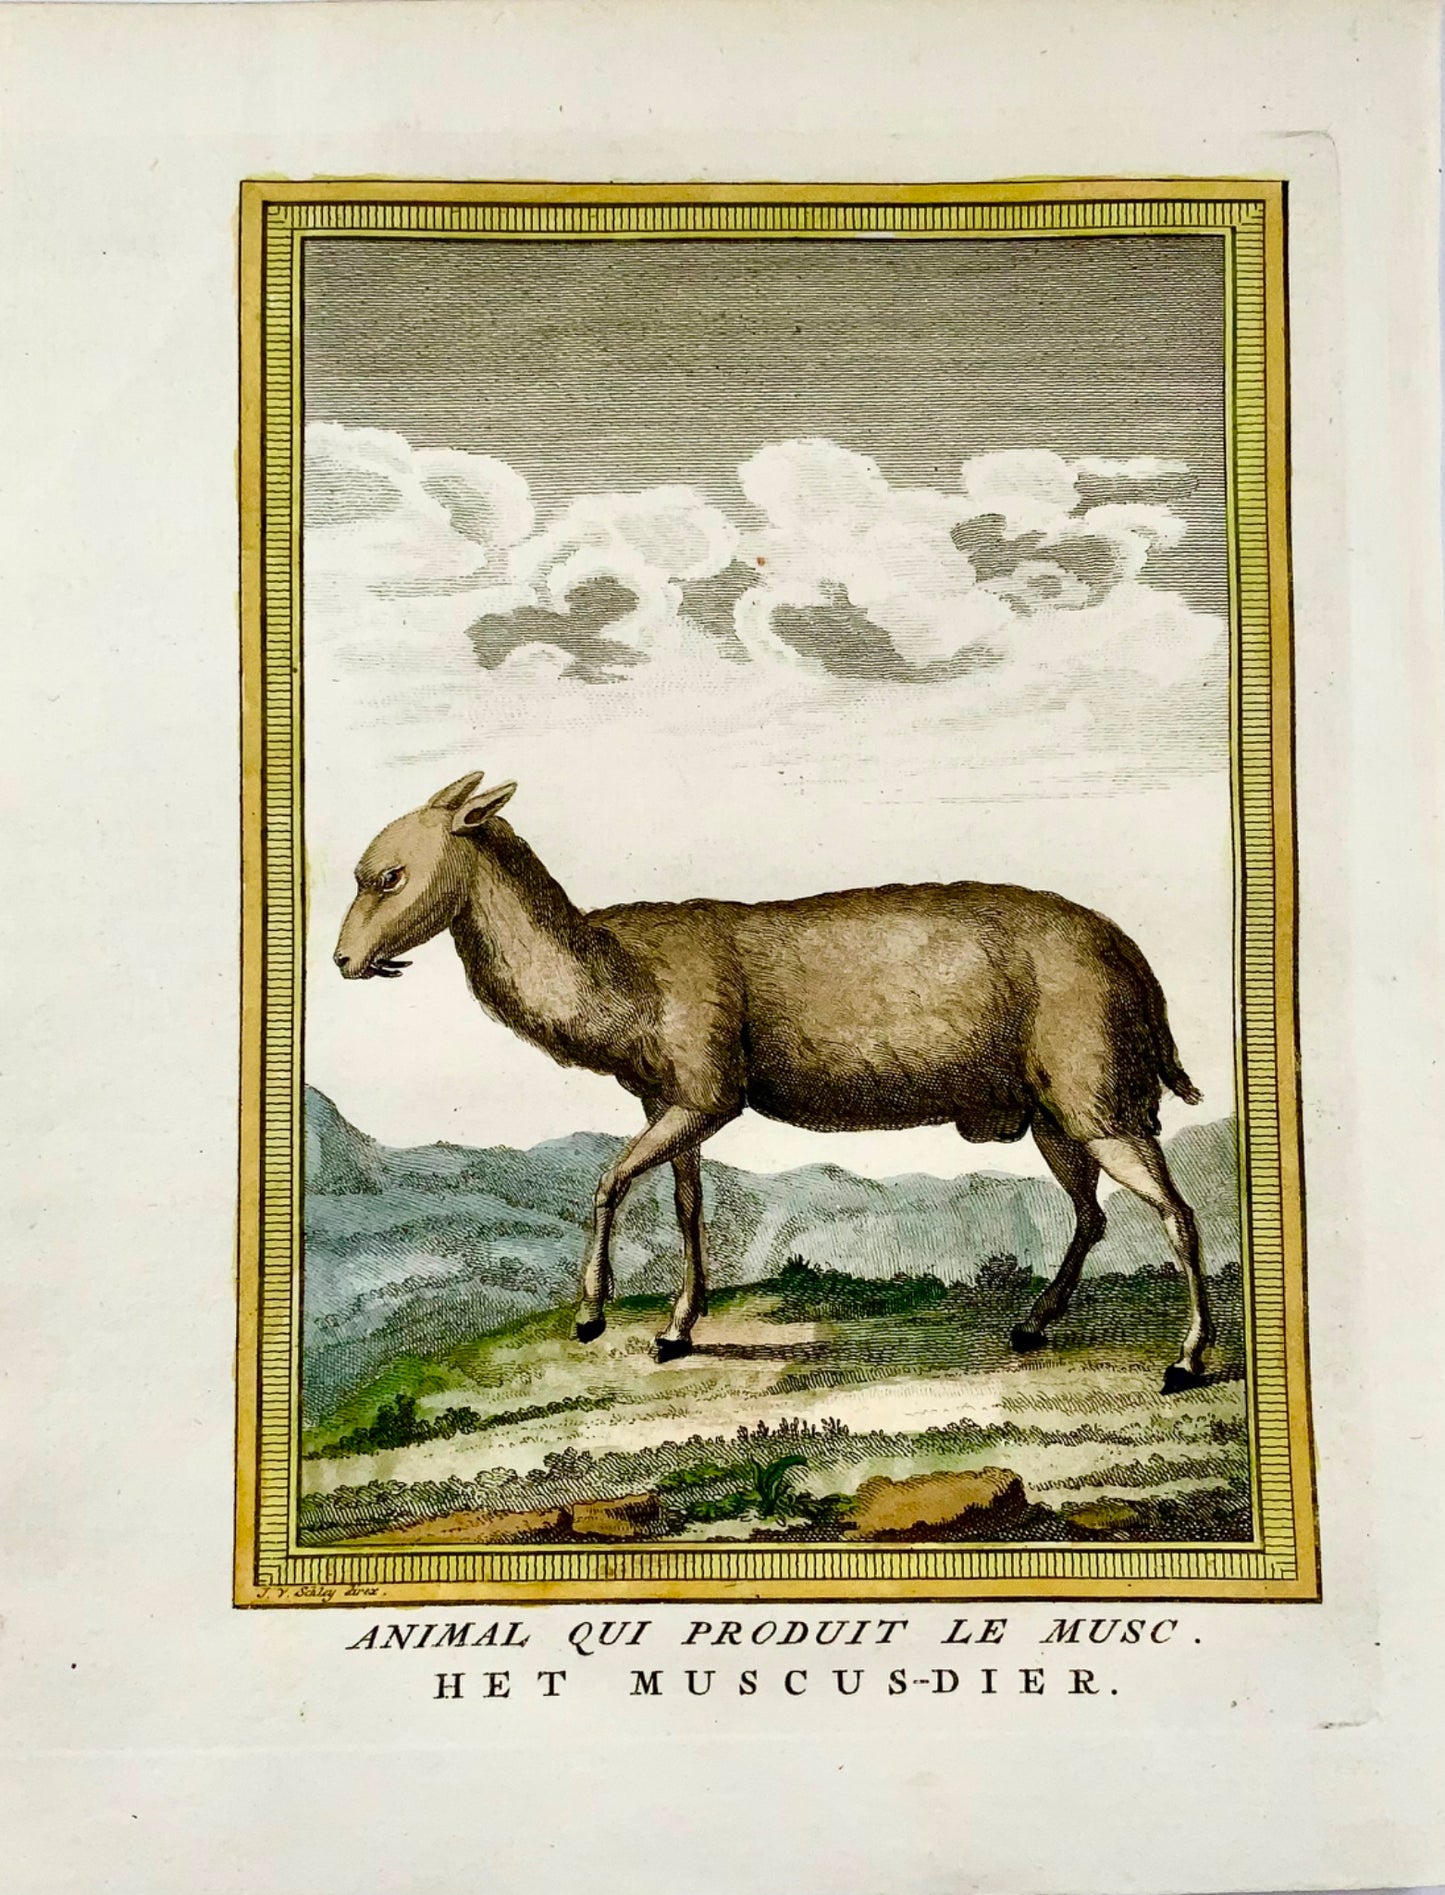 1750 Schley - MUSC DEER - Hand coloured engraving - Mammal